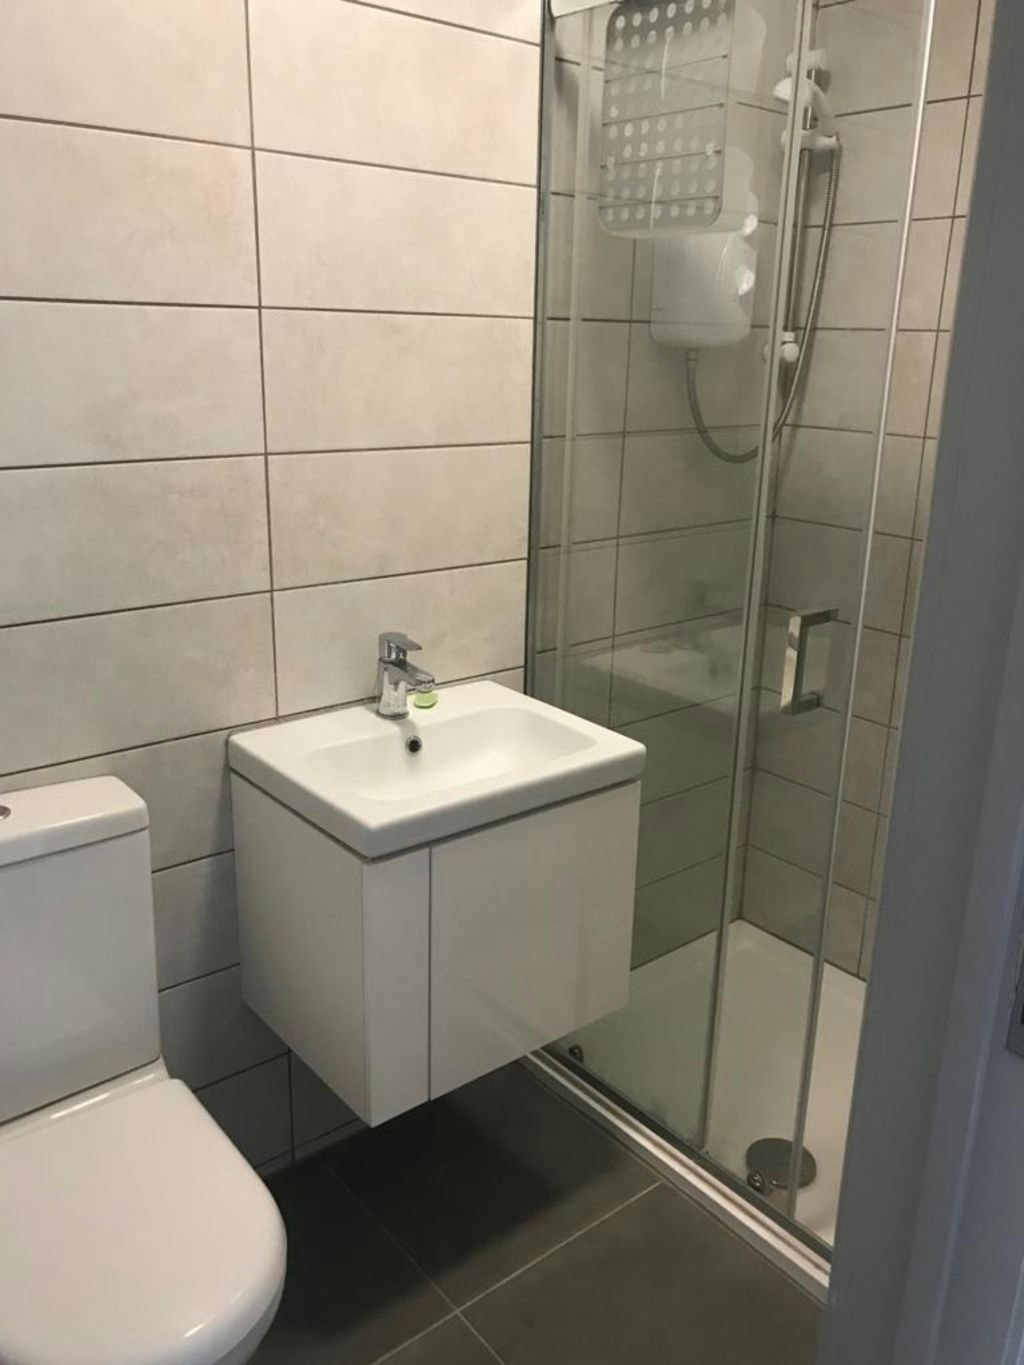 Studio apartment walking distance of Addenbrooke's and Papworth Hospital